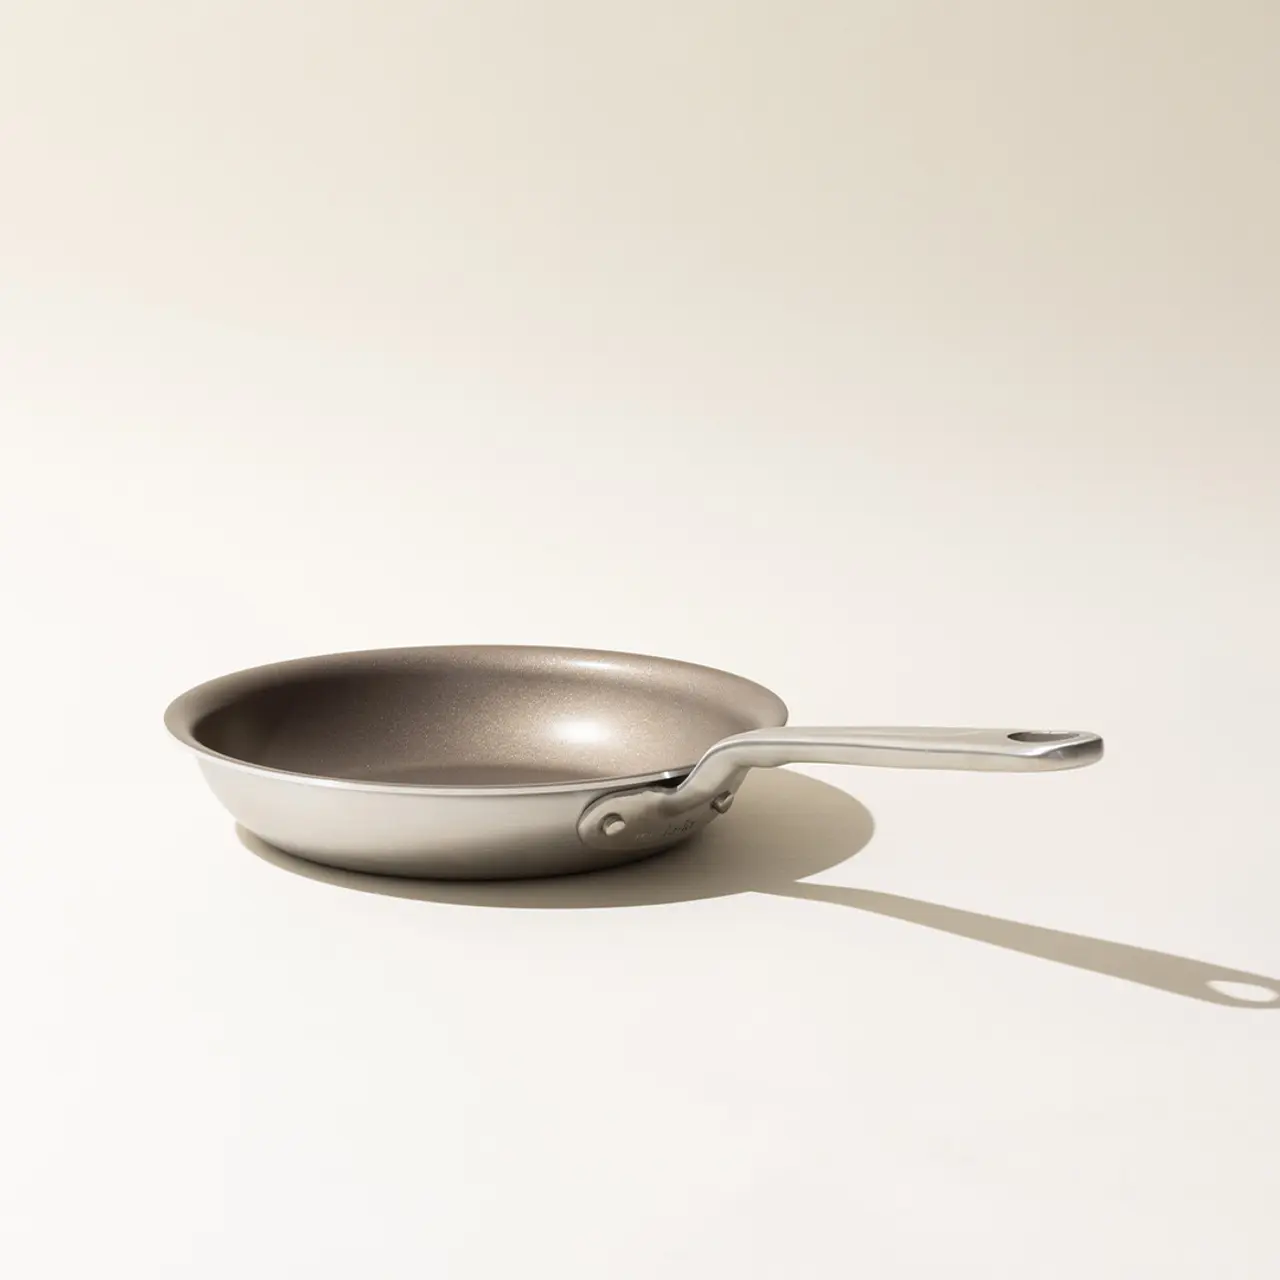 A stainless steel frying pan with a long handle is centered on a neutral background with a soft shadow indicating directional light.